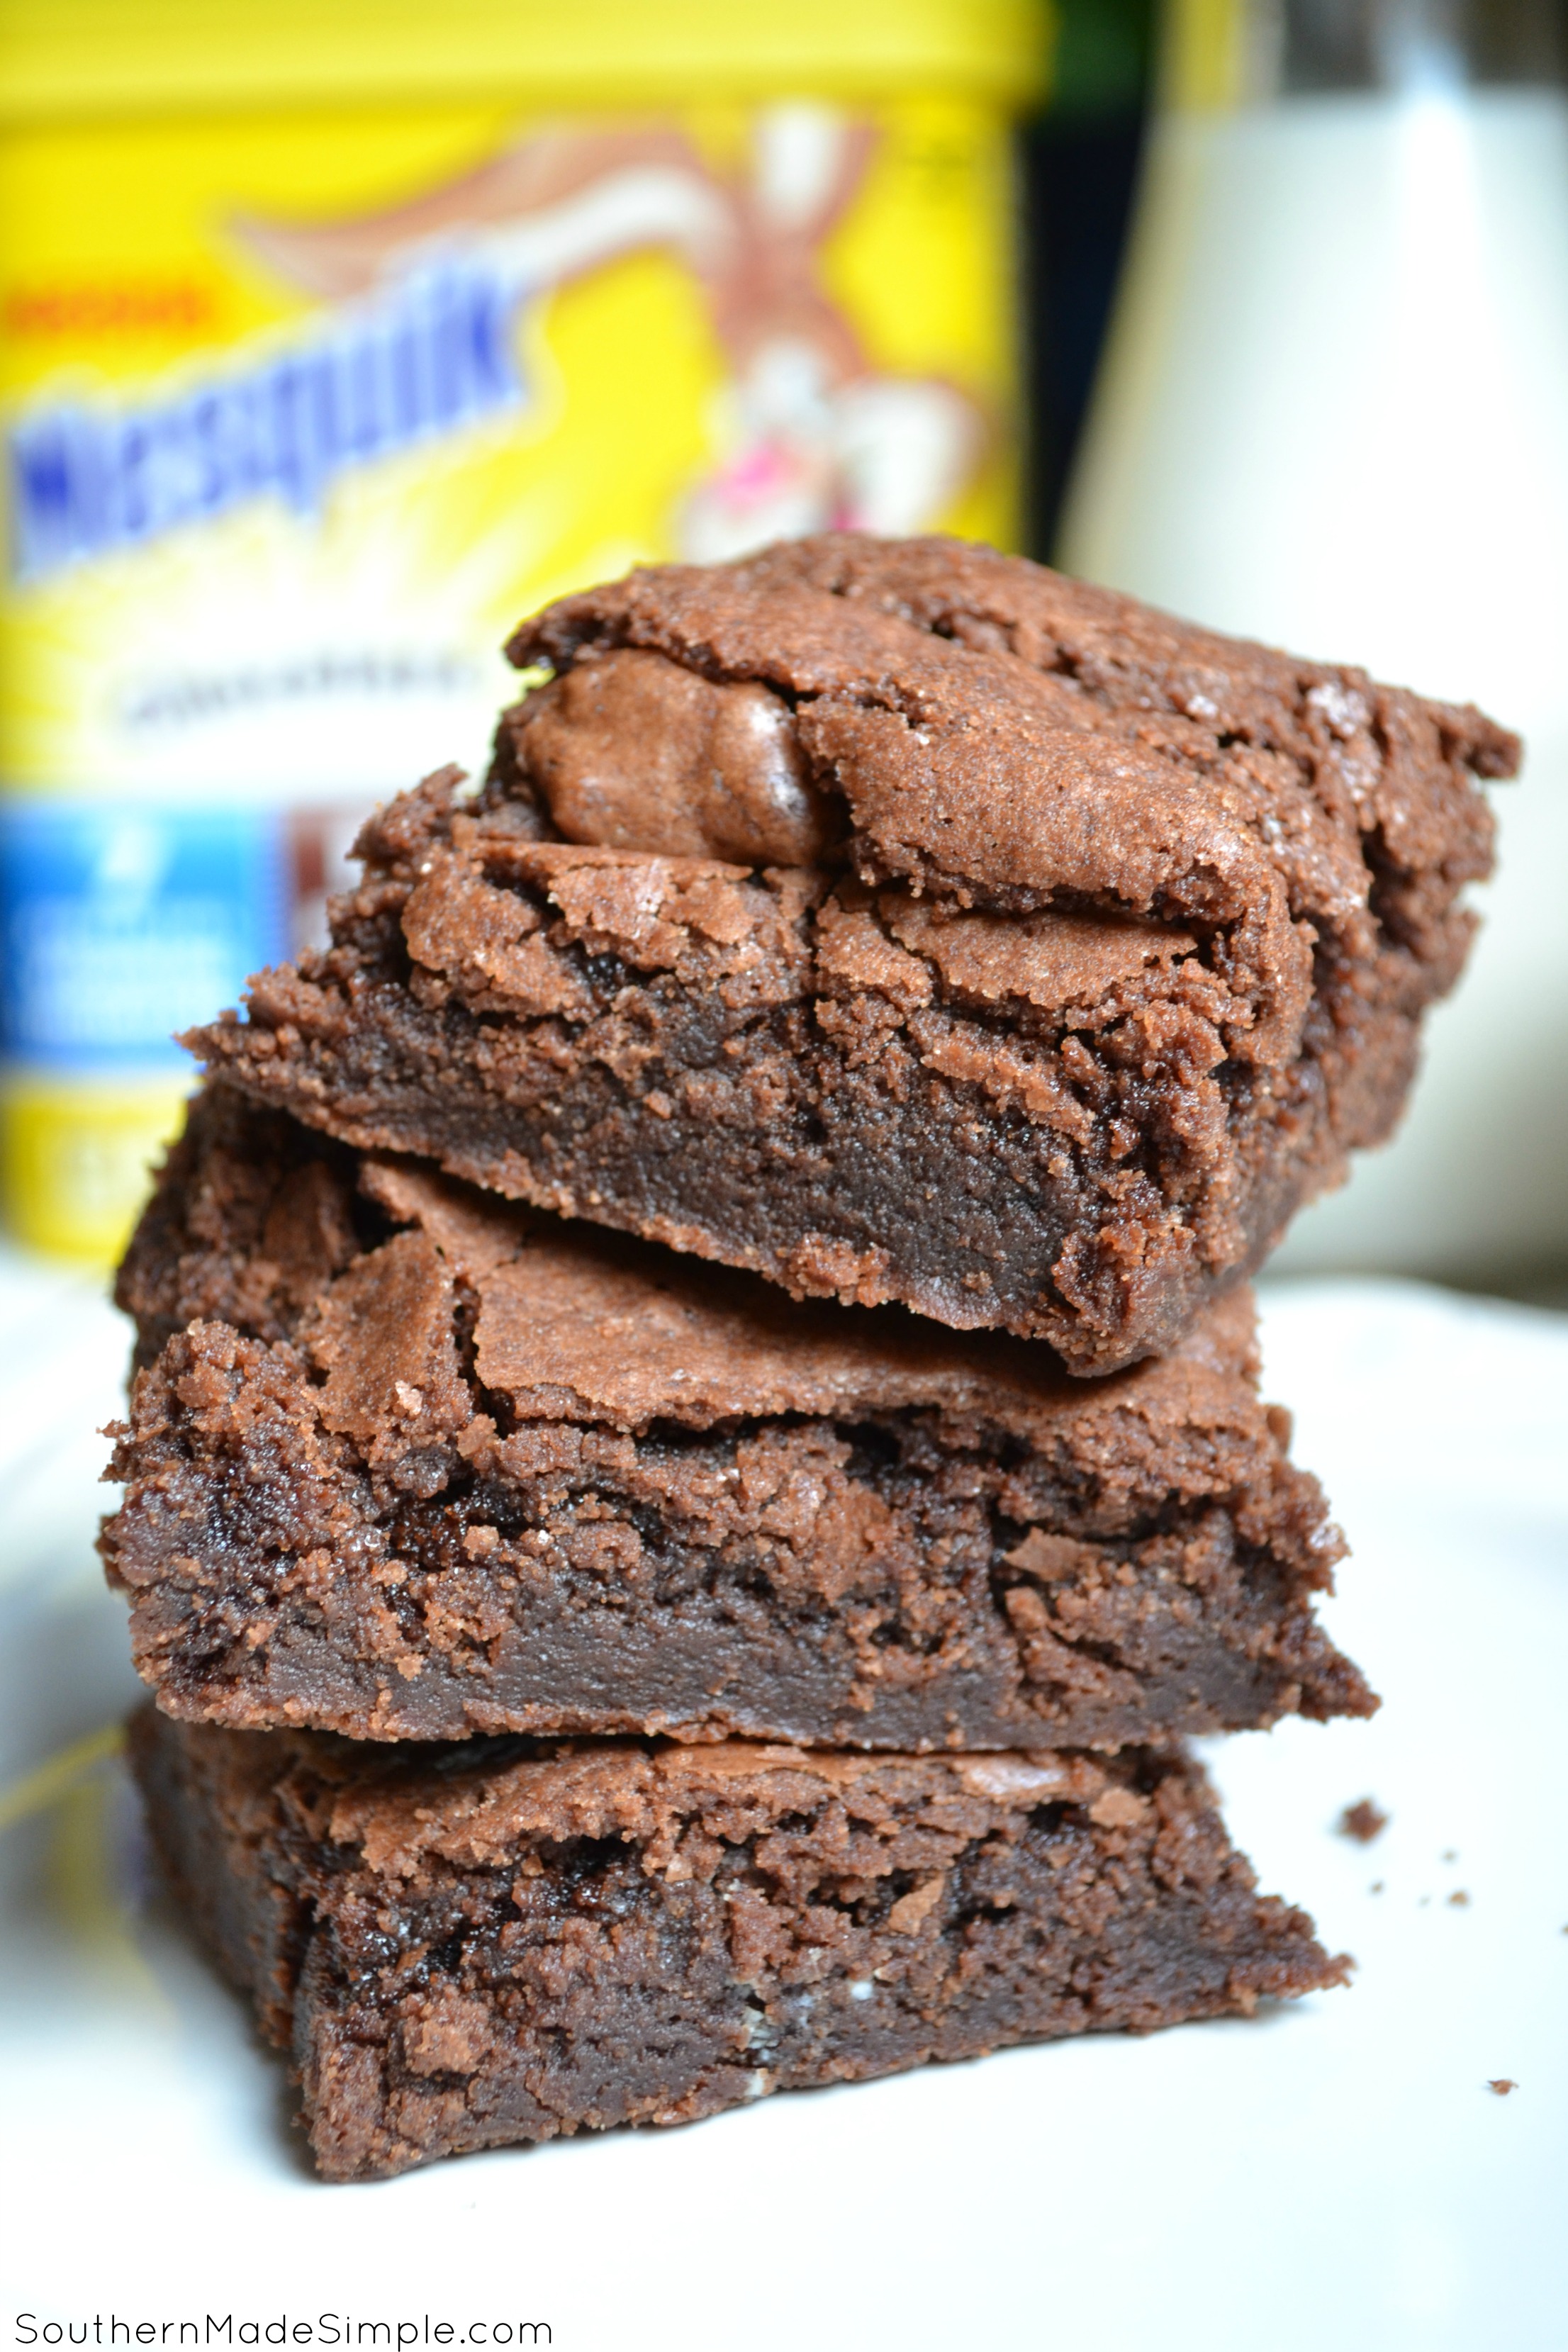 We all know that Nesquik make your milk taste amazing, but adding it to your brownie mix takes things to a whole nother level! Nesquik brownies are simple, delicious and even contain 7 essential vitamins and minerals! #StirImagination #ad